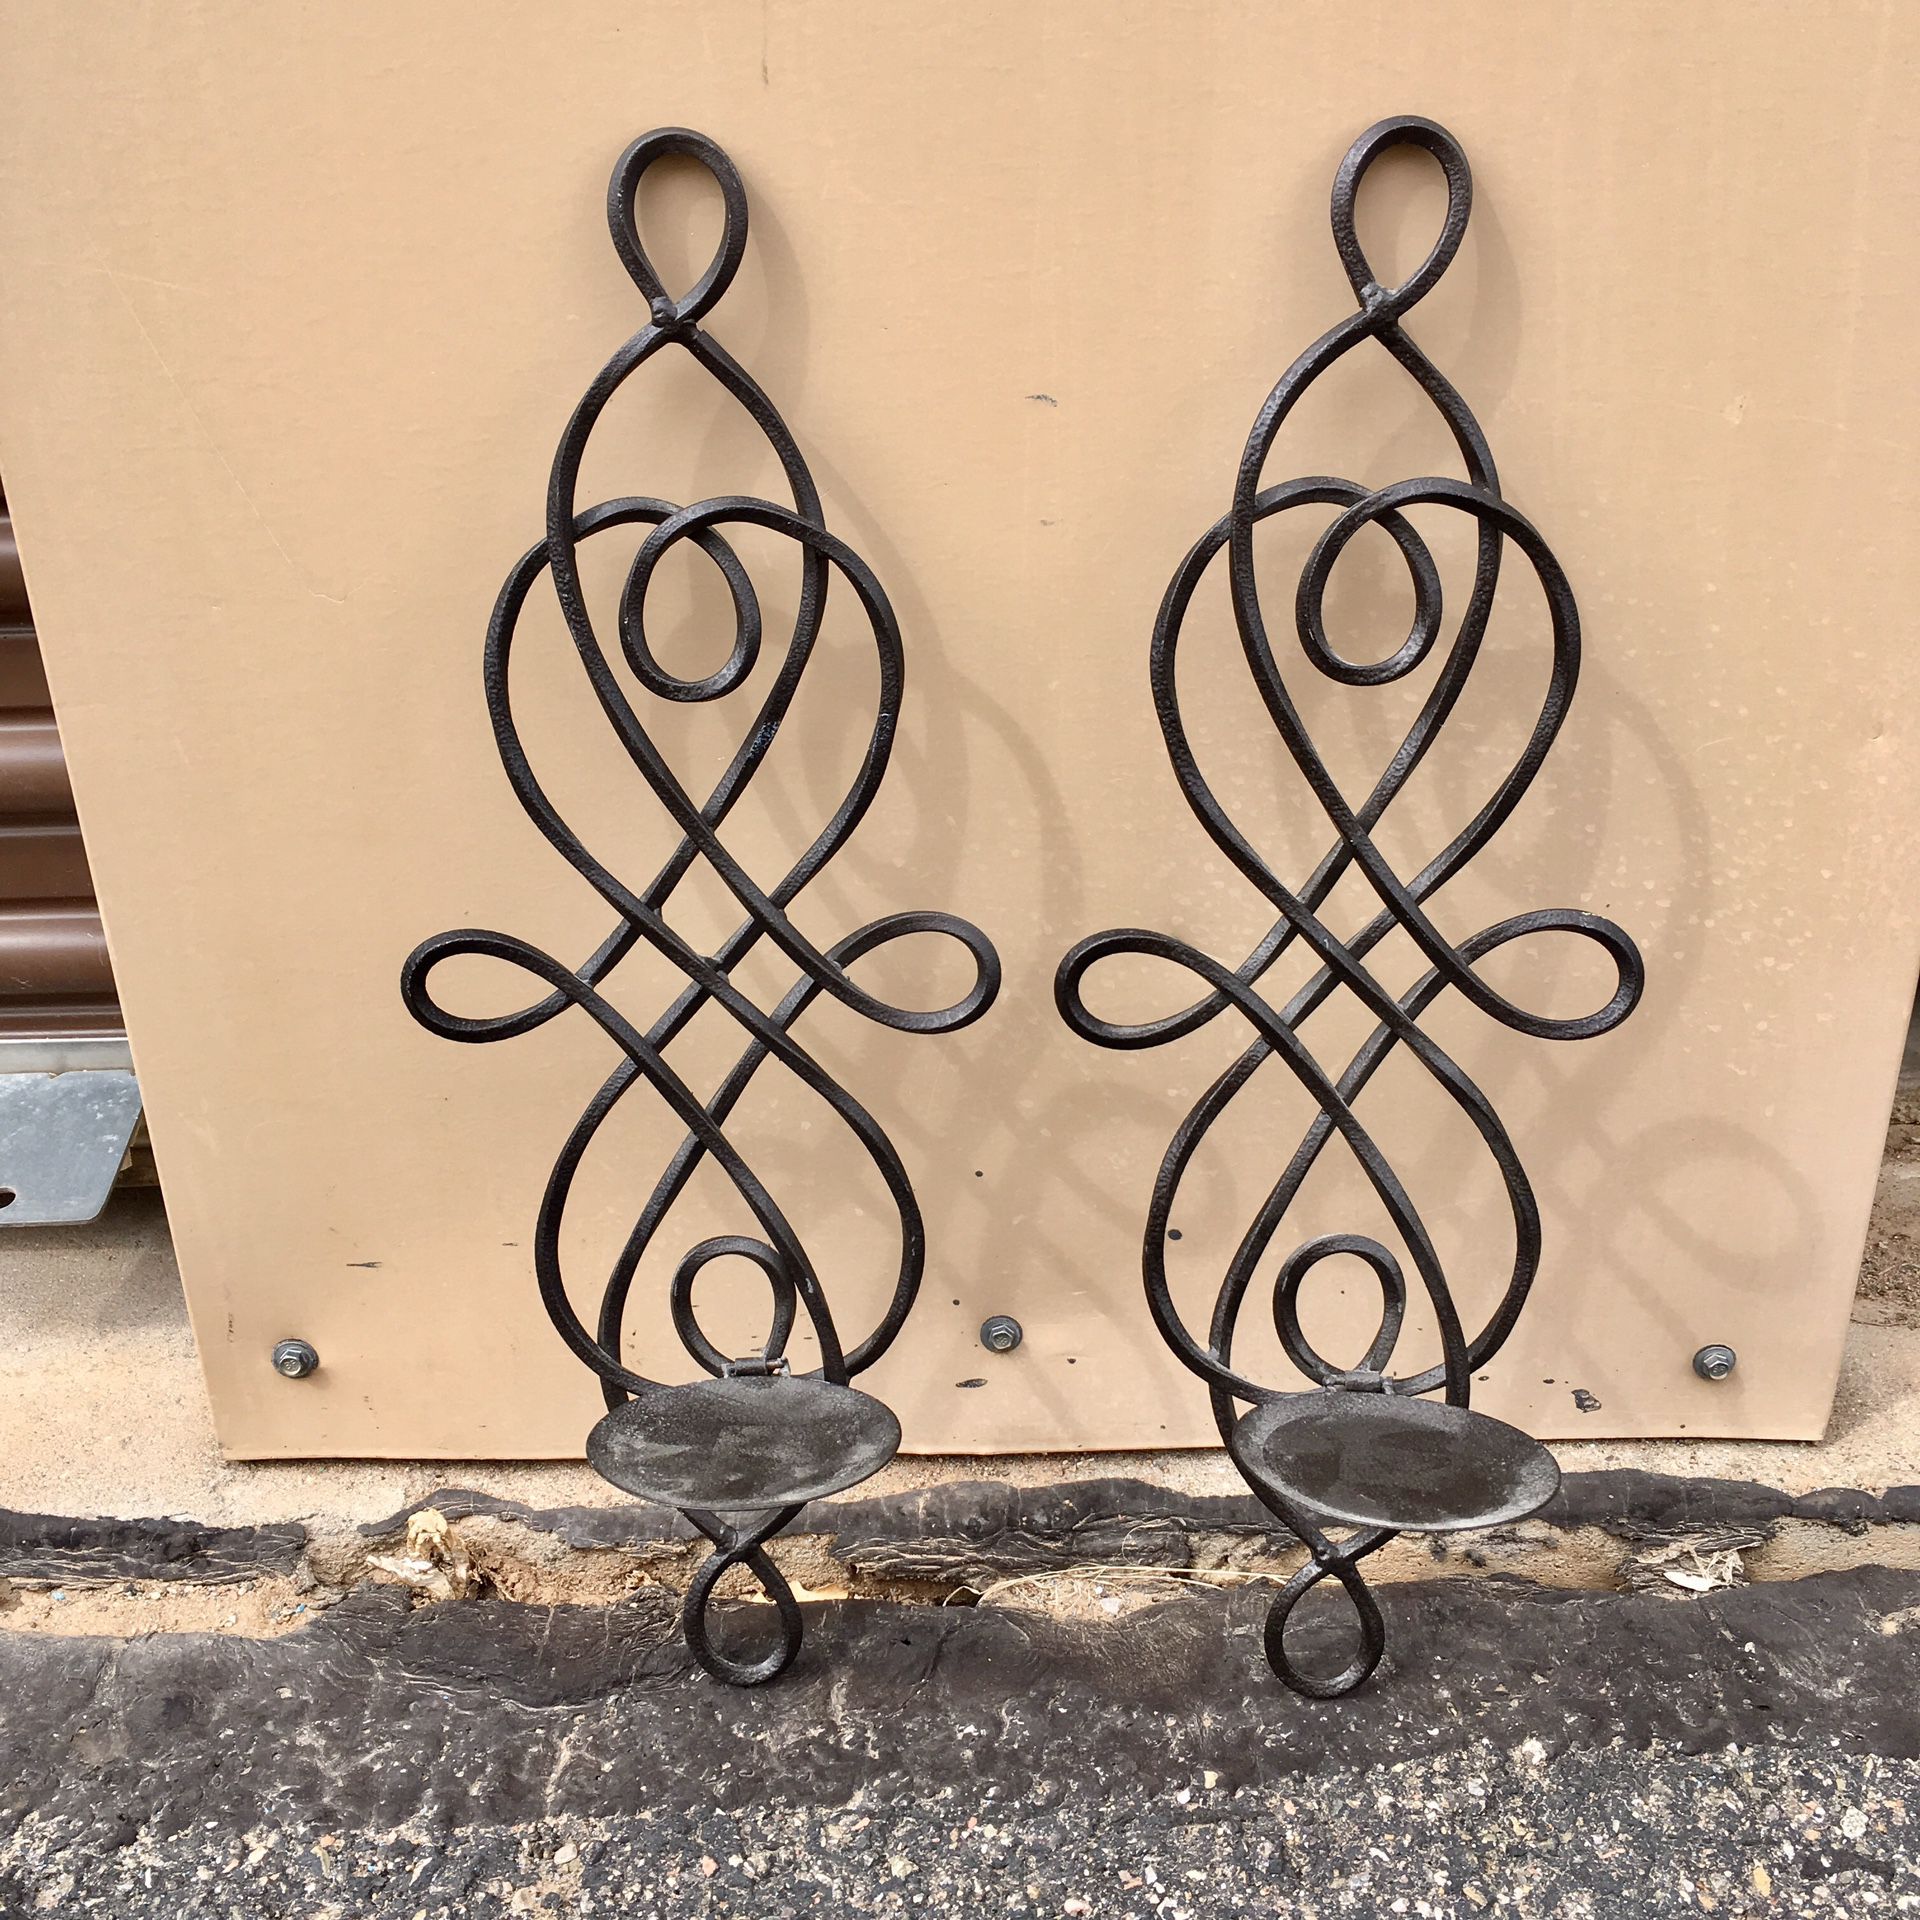 2 wrought iron candle holders 18"h